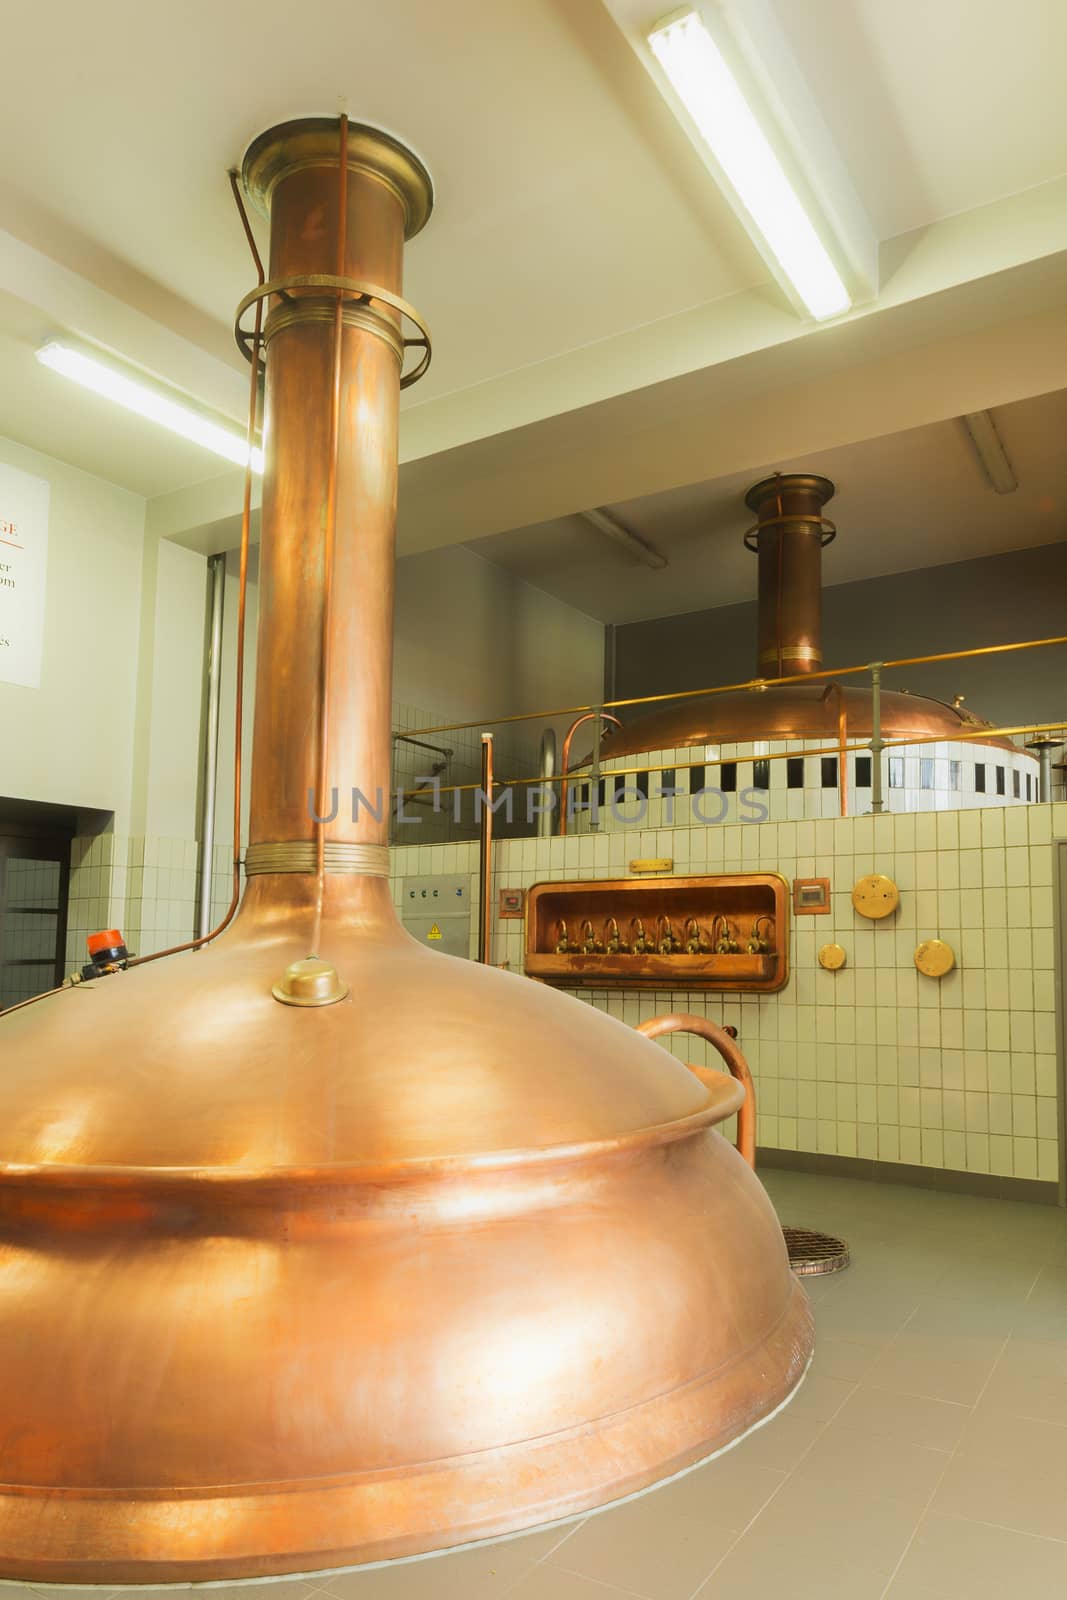 Boiling kettle and mash tun in the background. by Claudine